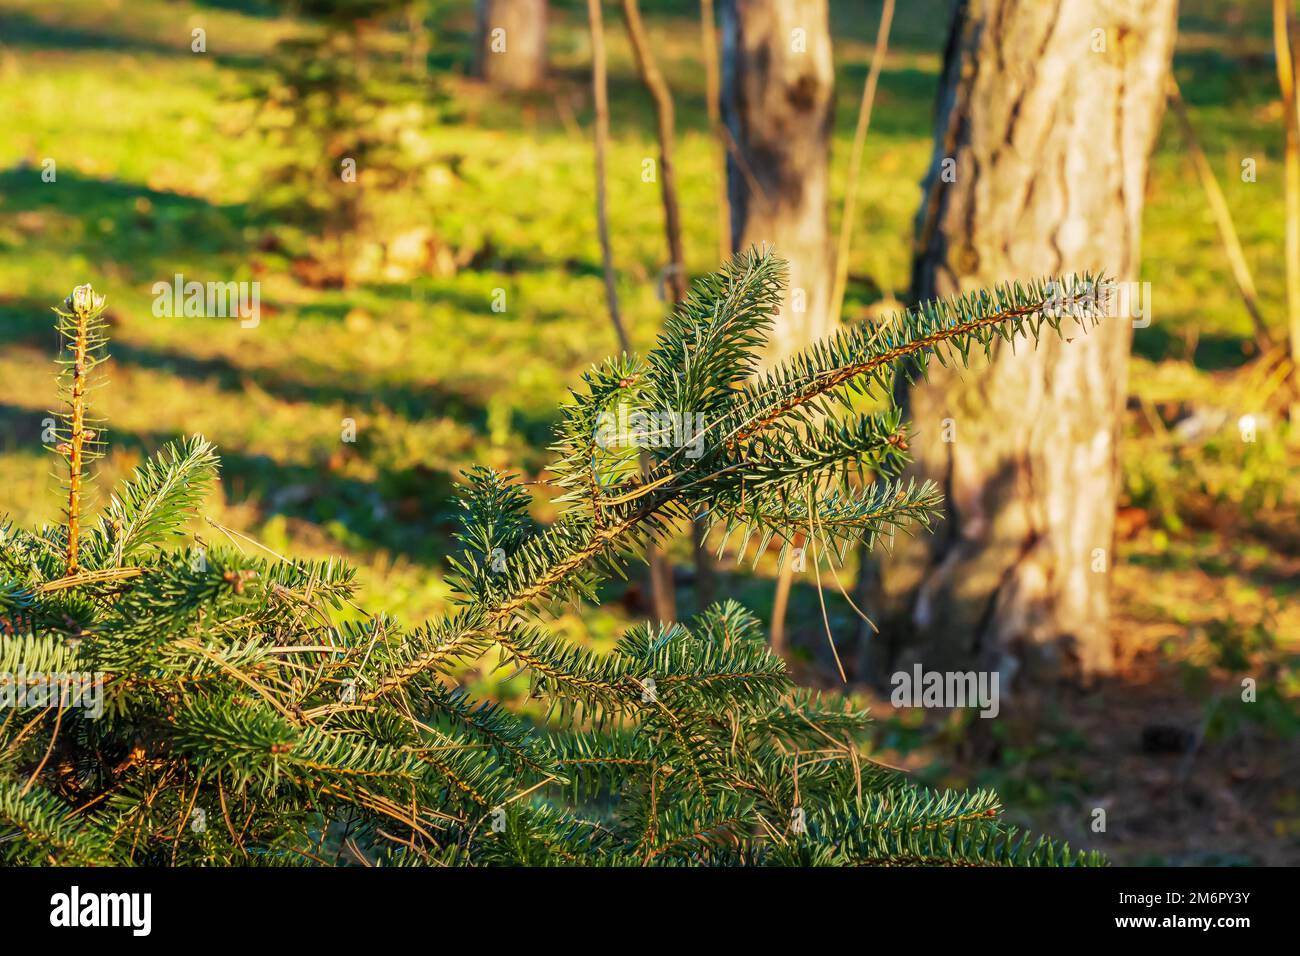 Branches of Greek fir, Abies cephalonica on a blurred background. The image shows the leaves of a young Greek fir. Stock Photo